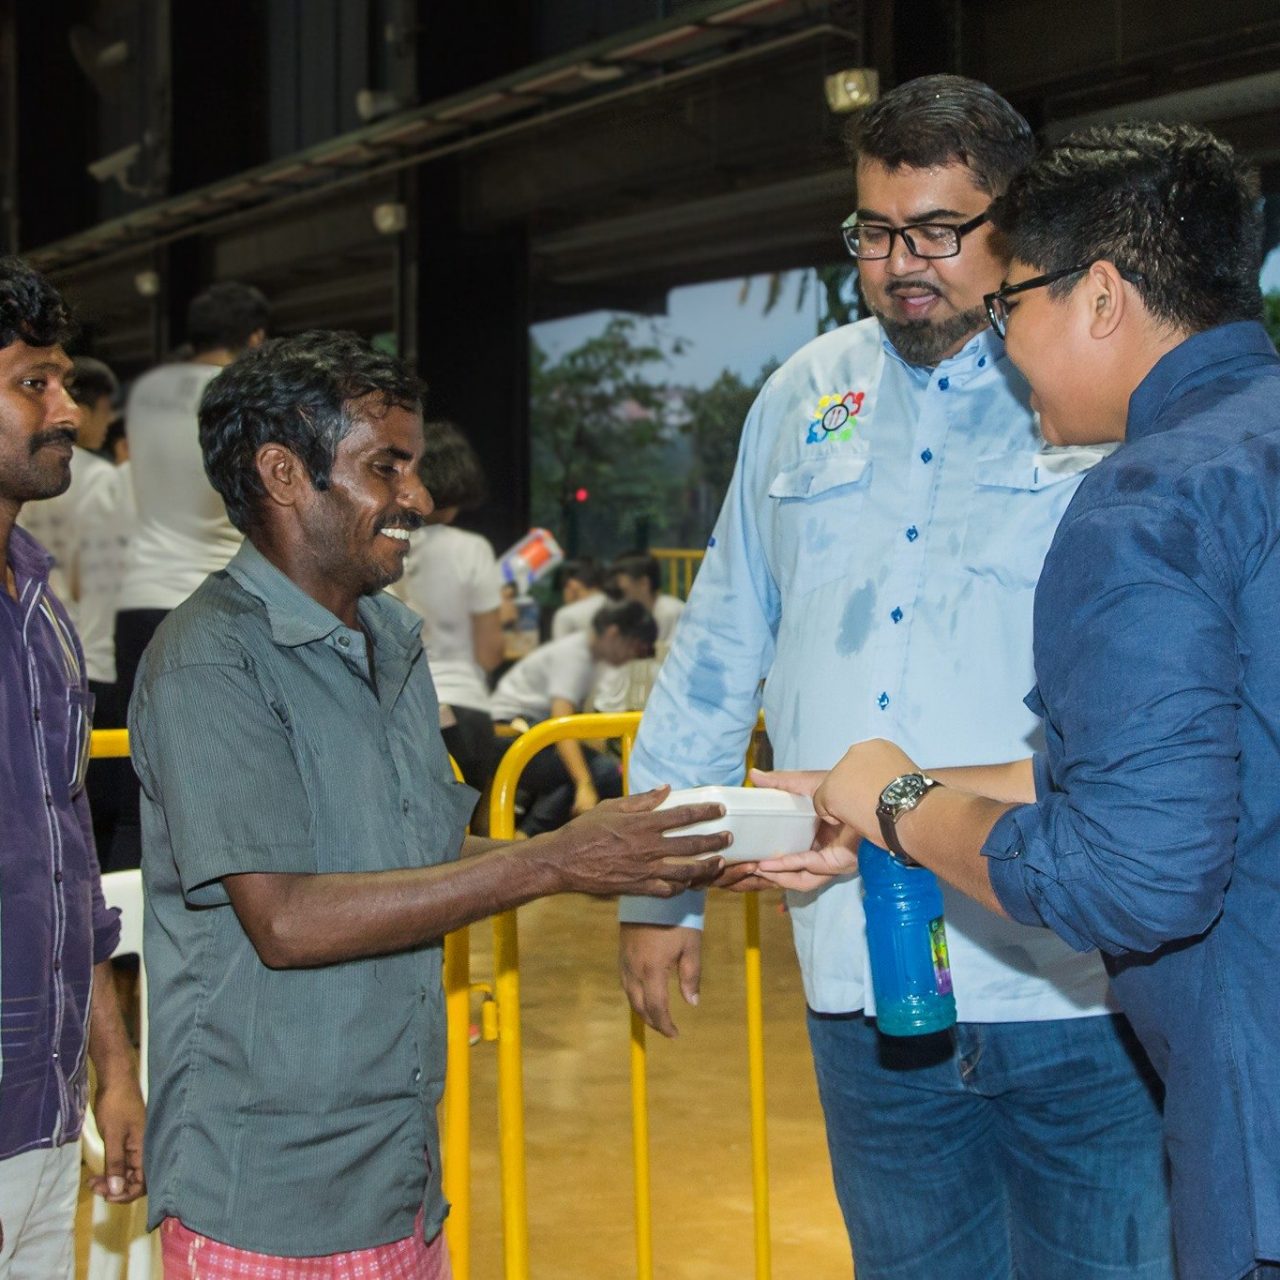 Nizar, second from right, helping to distribute food to foreign workers.